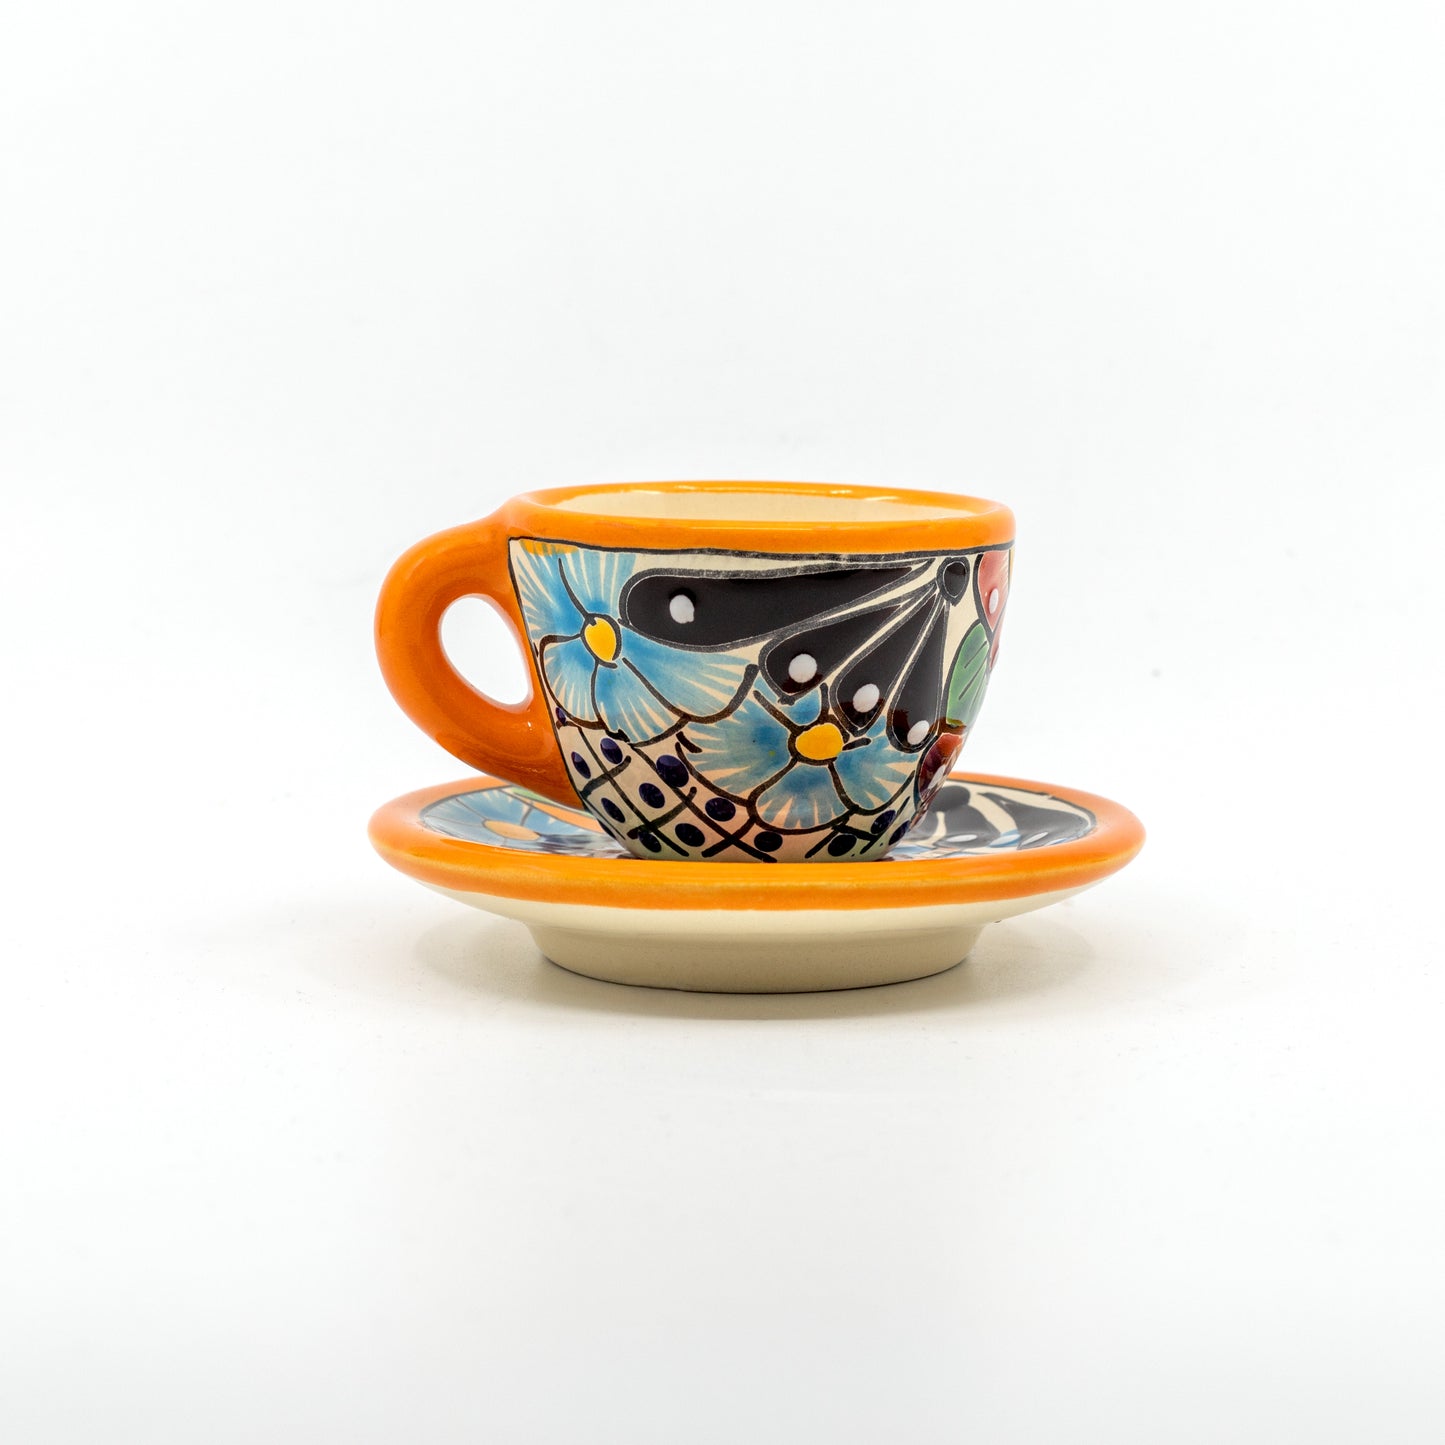 Vibrant Mexican handmade espresso set with ceramic cup & saucer, showcasing colorful handpainted folk art, made in Mexico for a unique touch